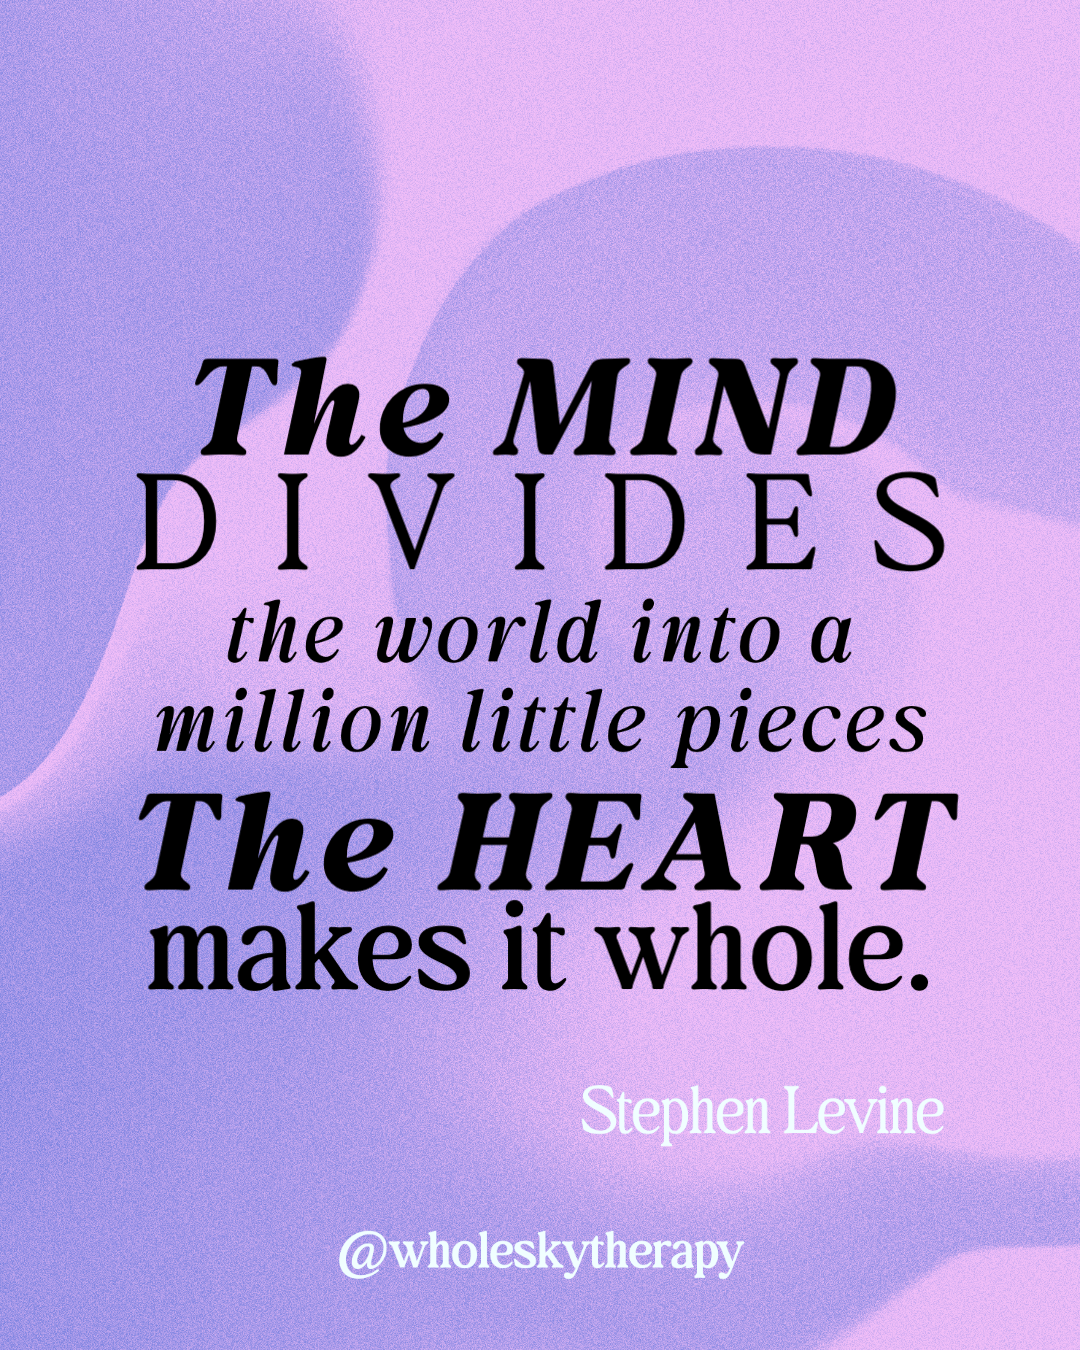 S Levine quote-1.png